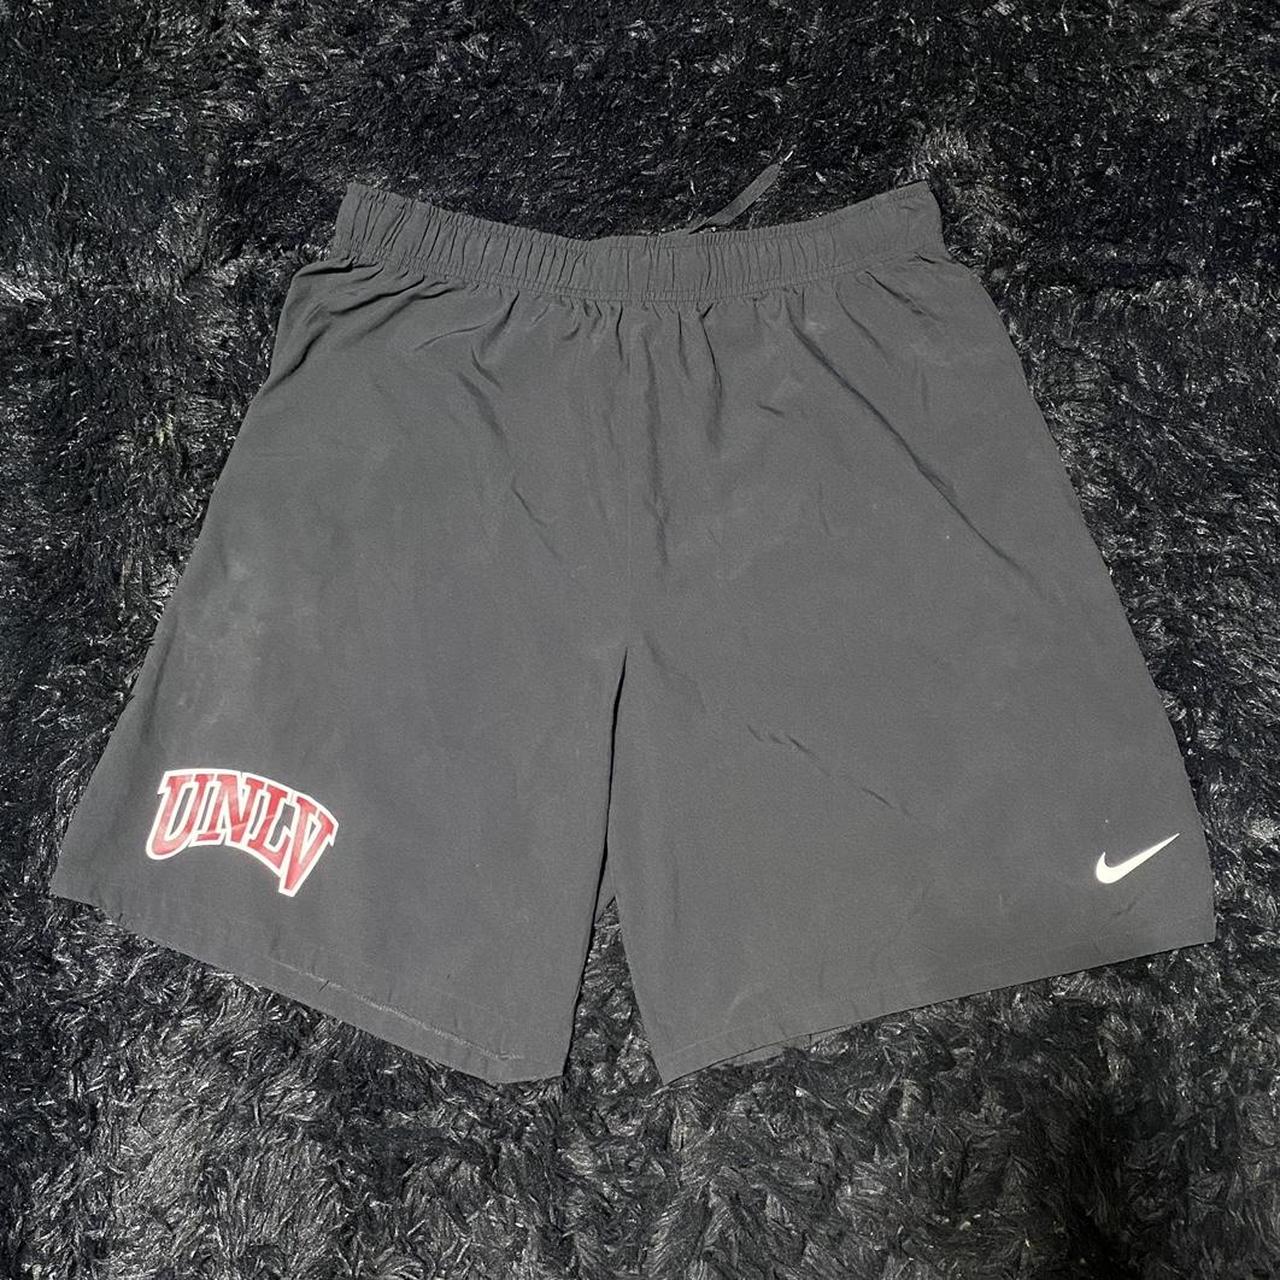 Unlv Nike shorts very lightly stained (can barely see) - Depop